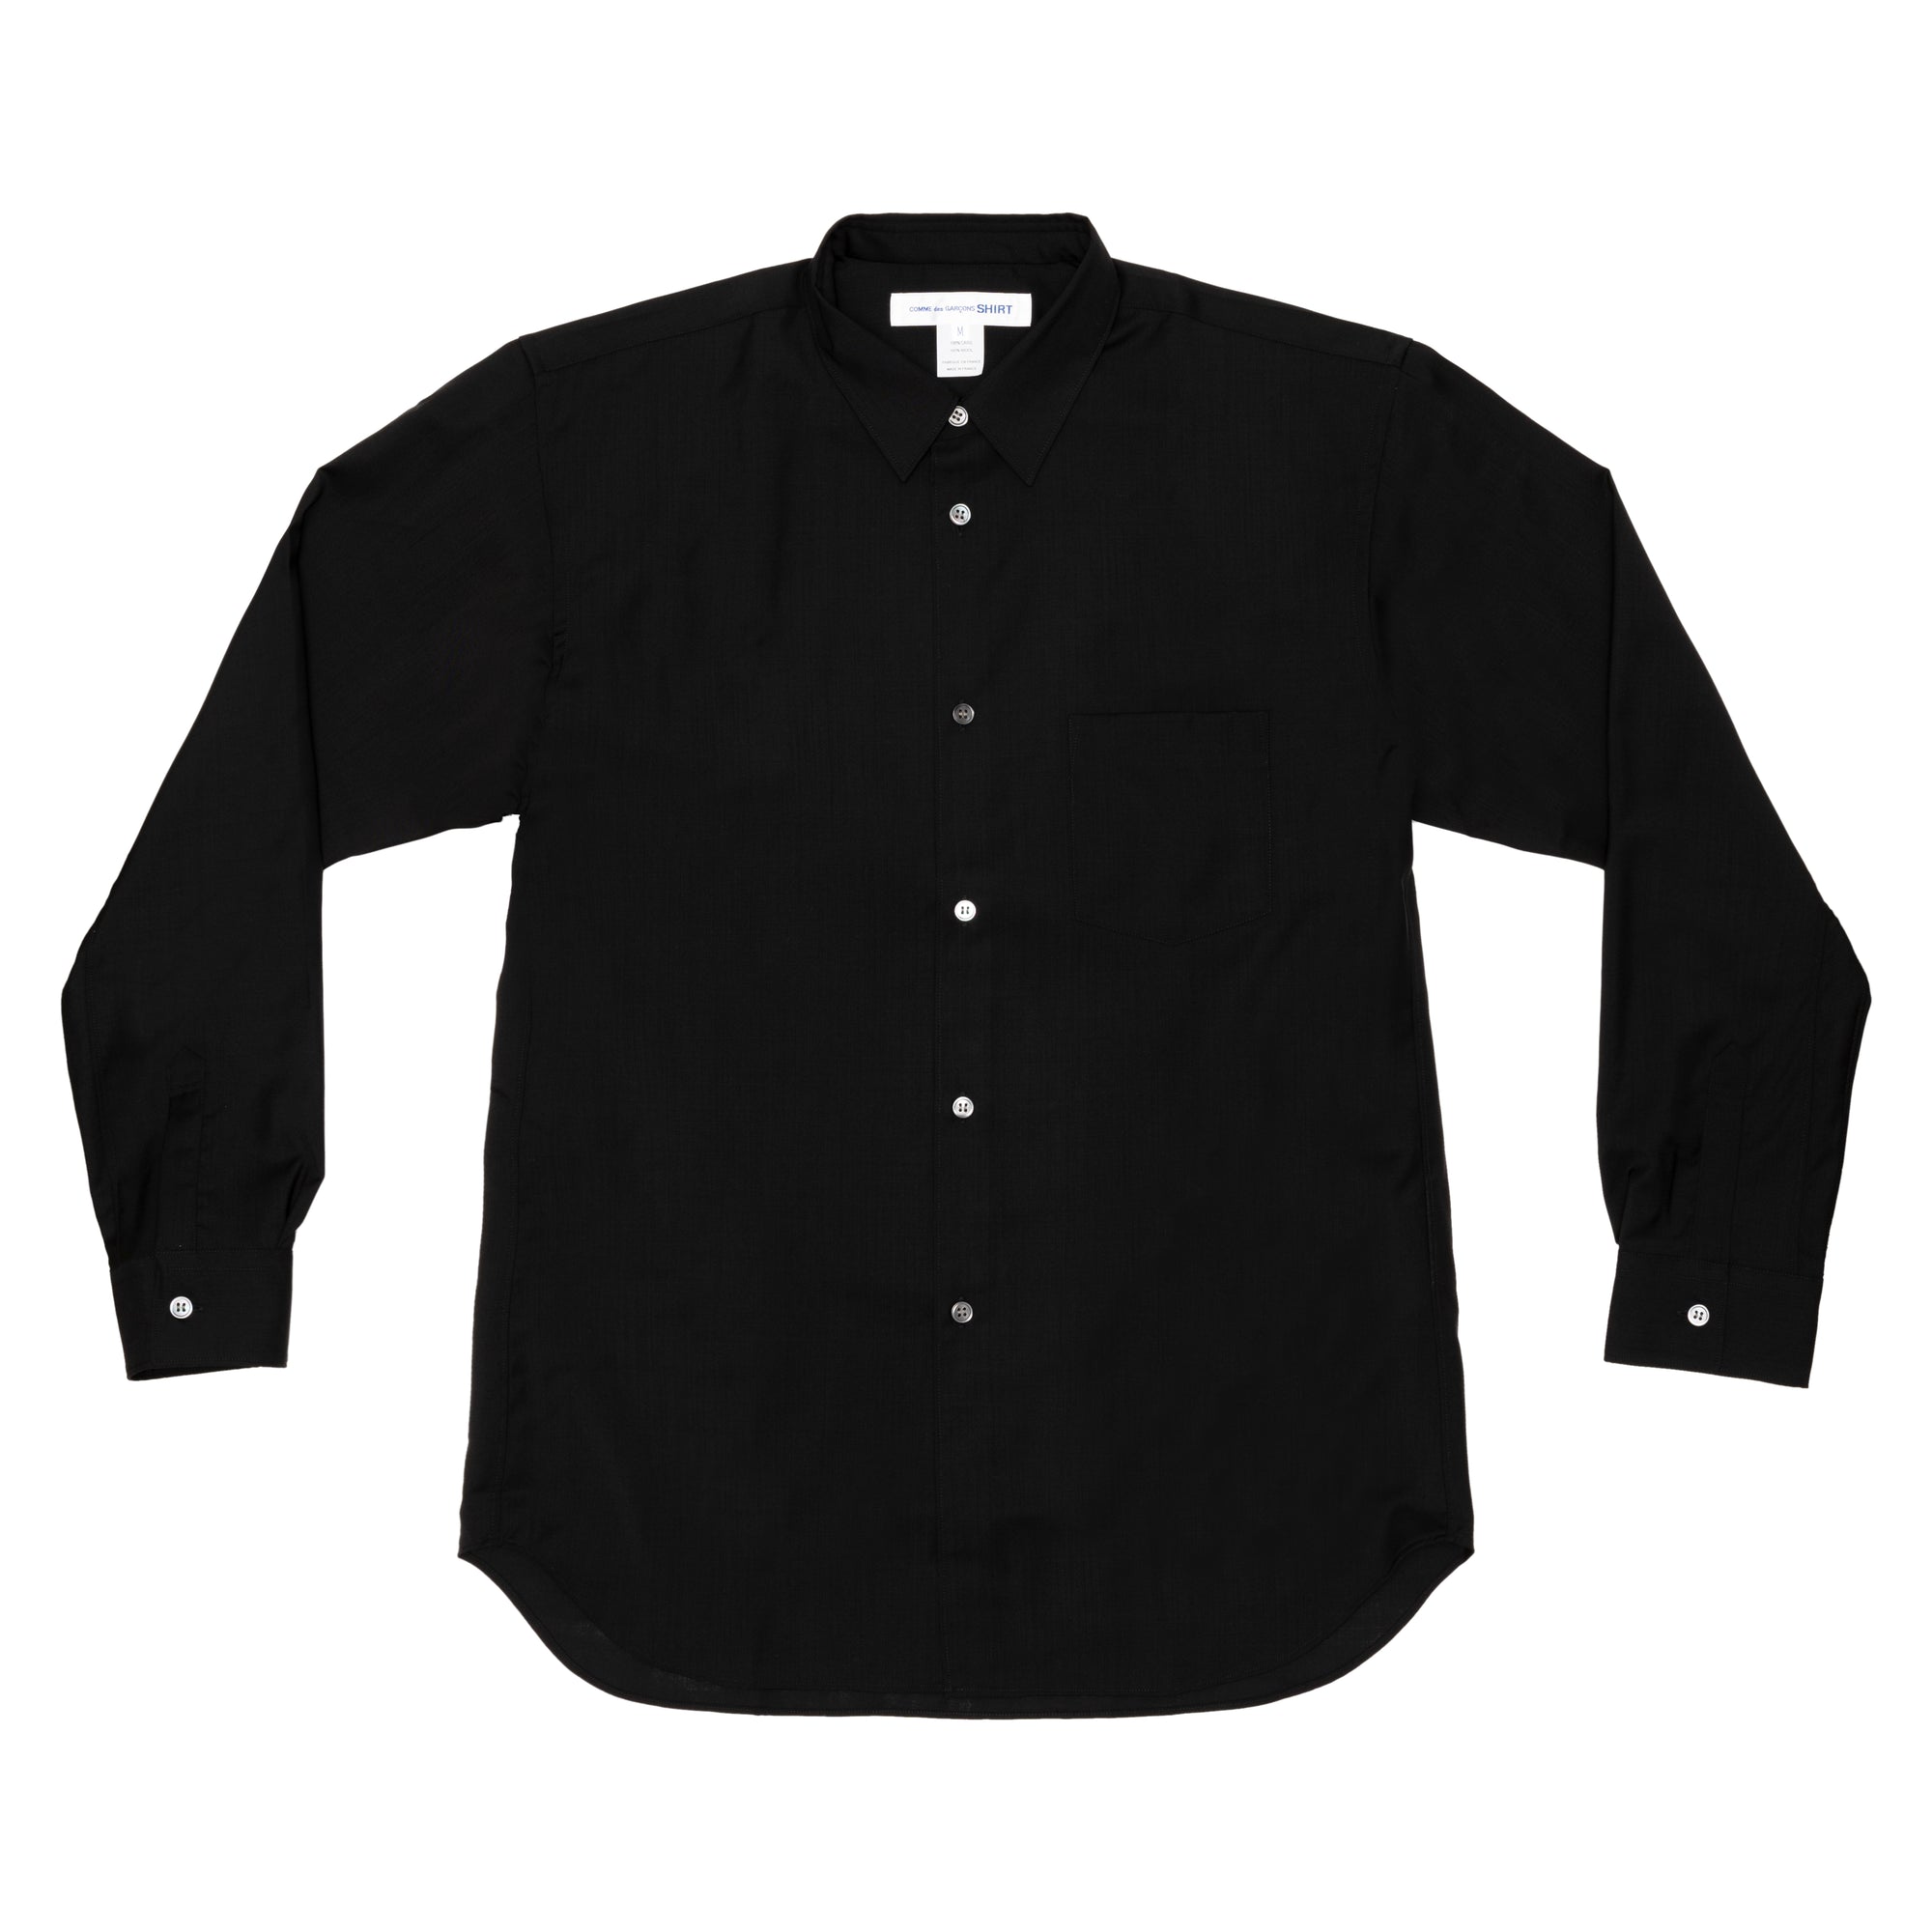 CDG SHIRT FOREVER - Classic Fit Fine Wool Shirt - (Black) view 1